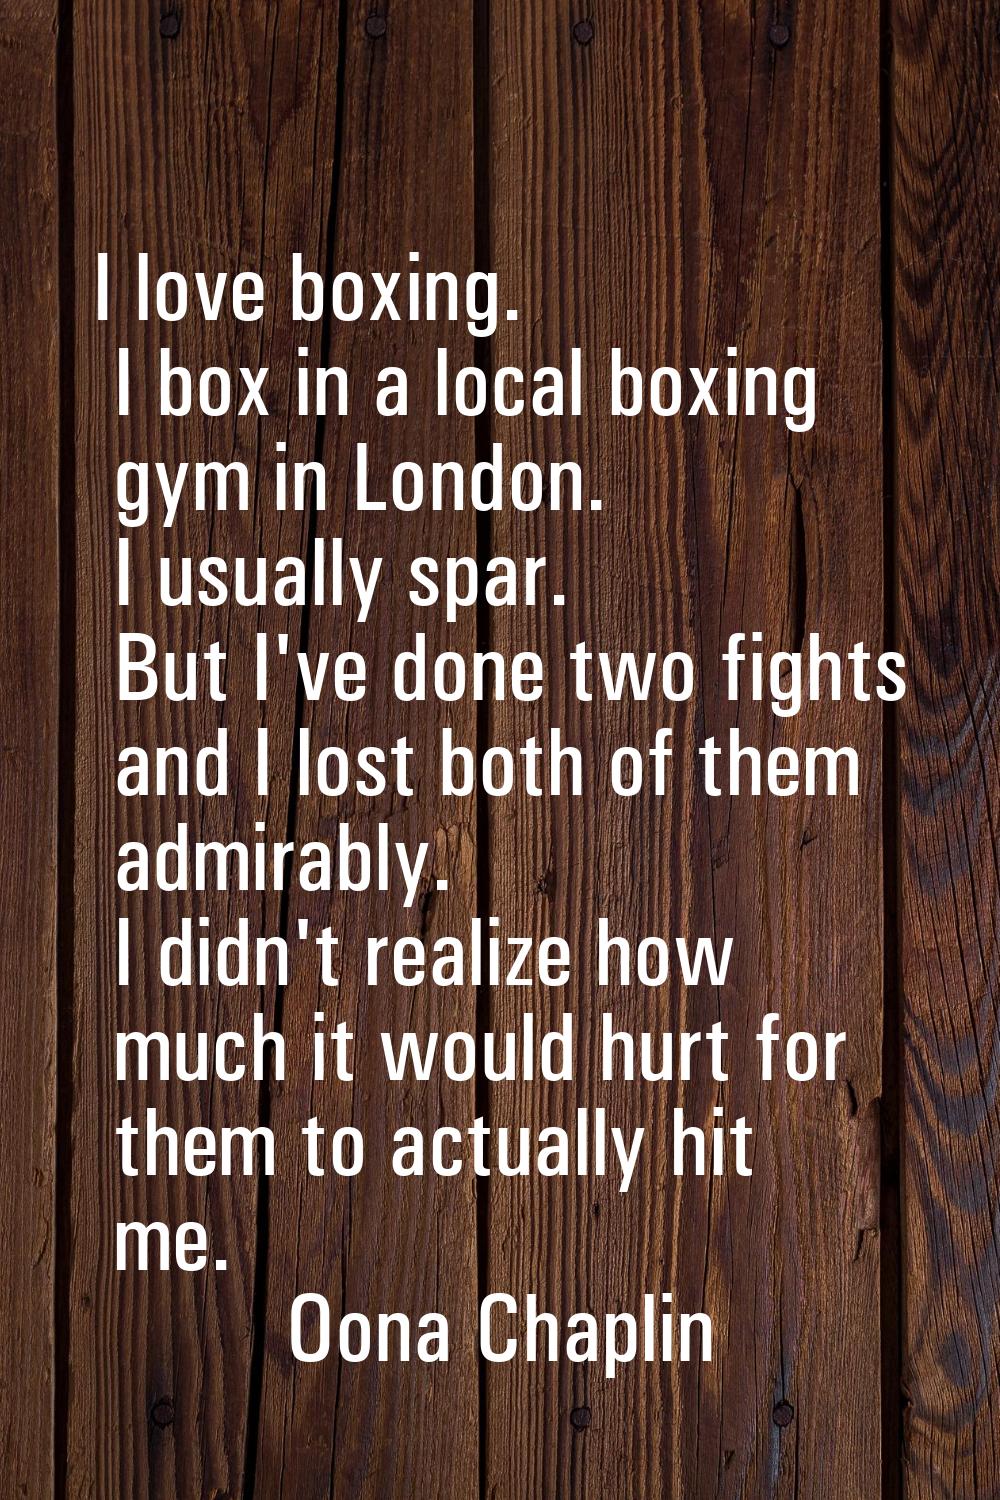 I love boxing. I box in a local boxing gym in London. I usually spar. But I've done two fights and 